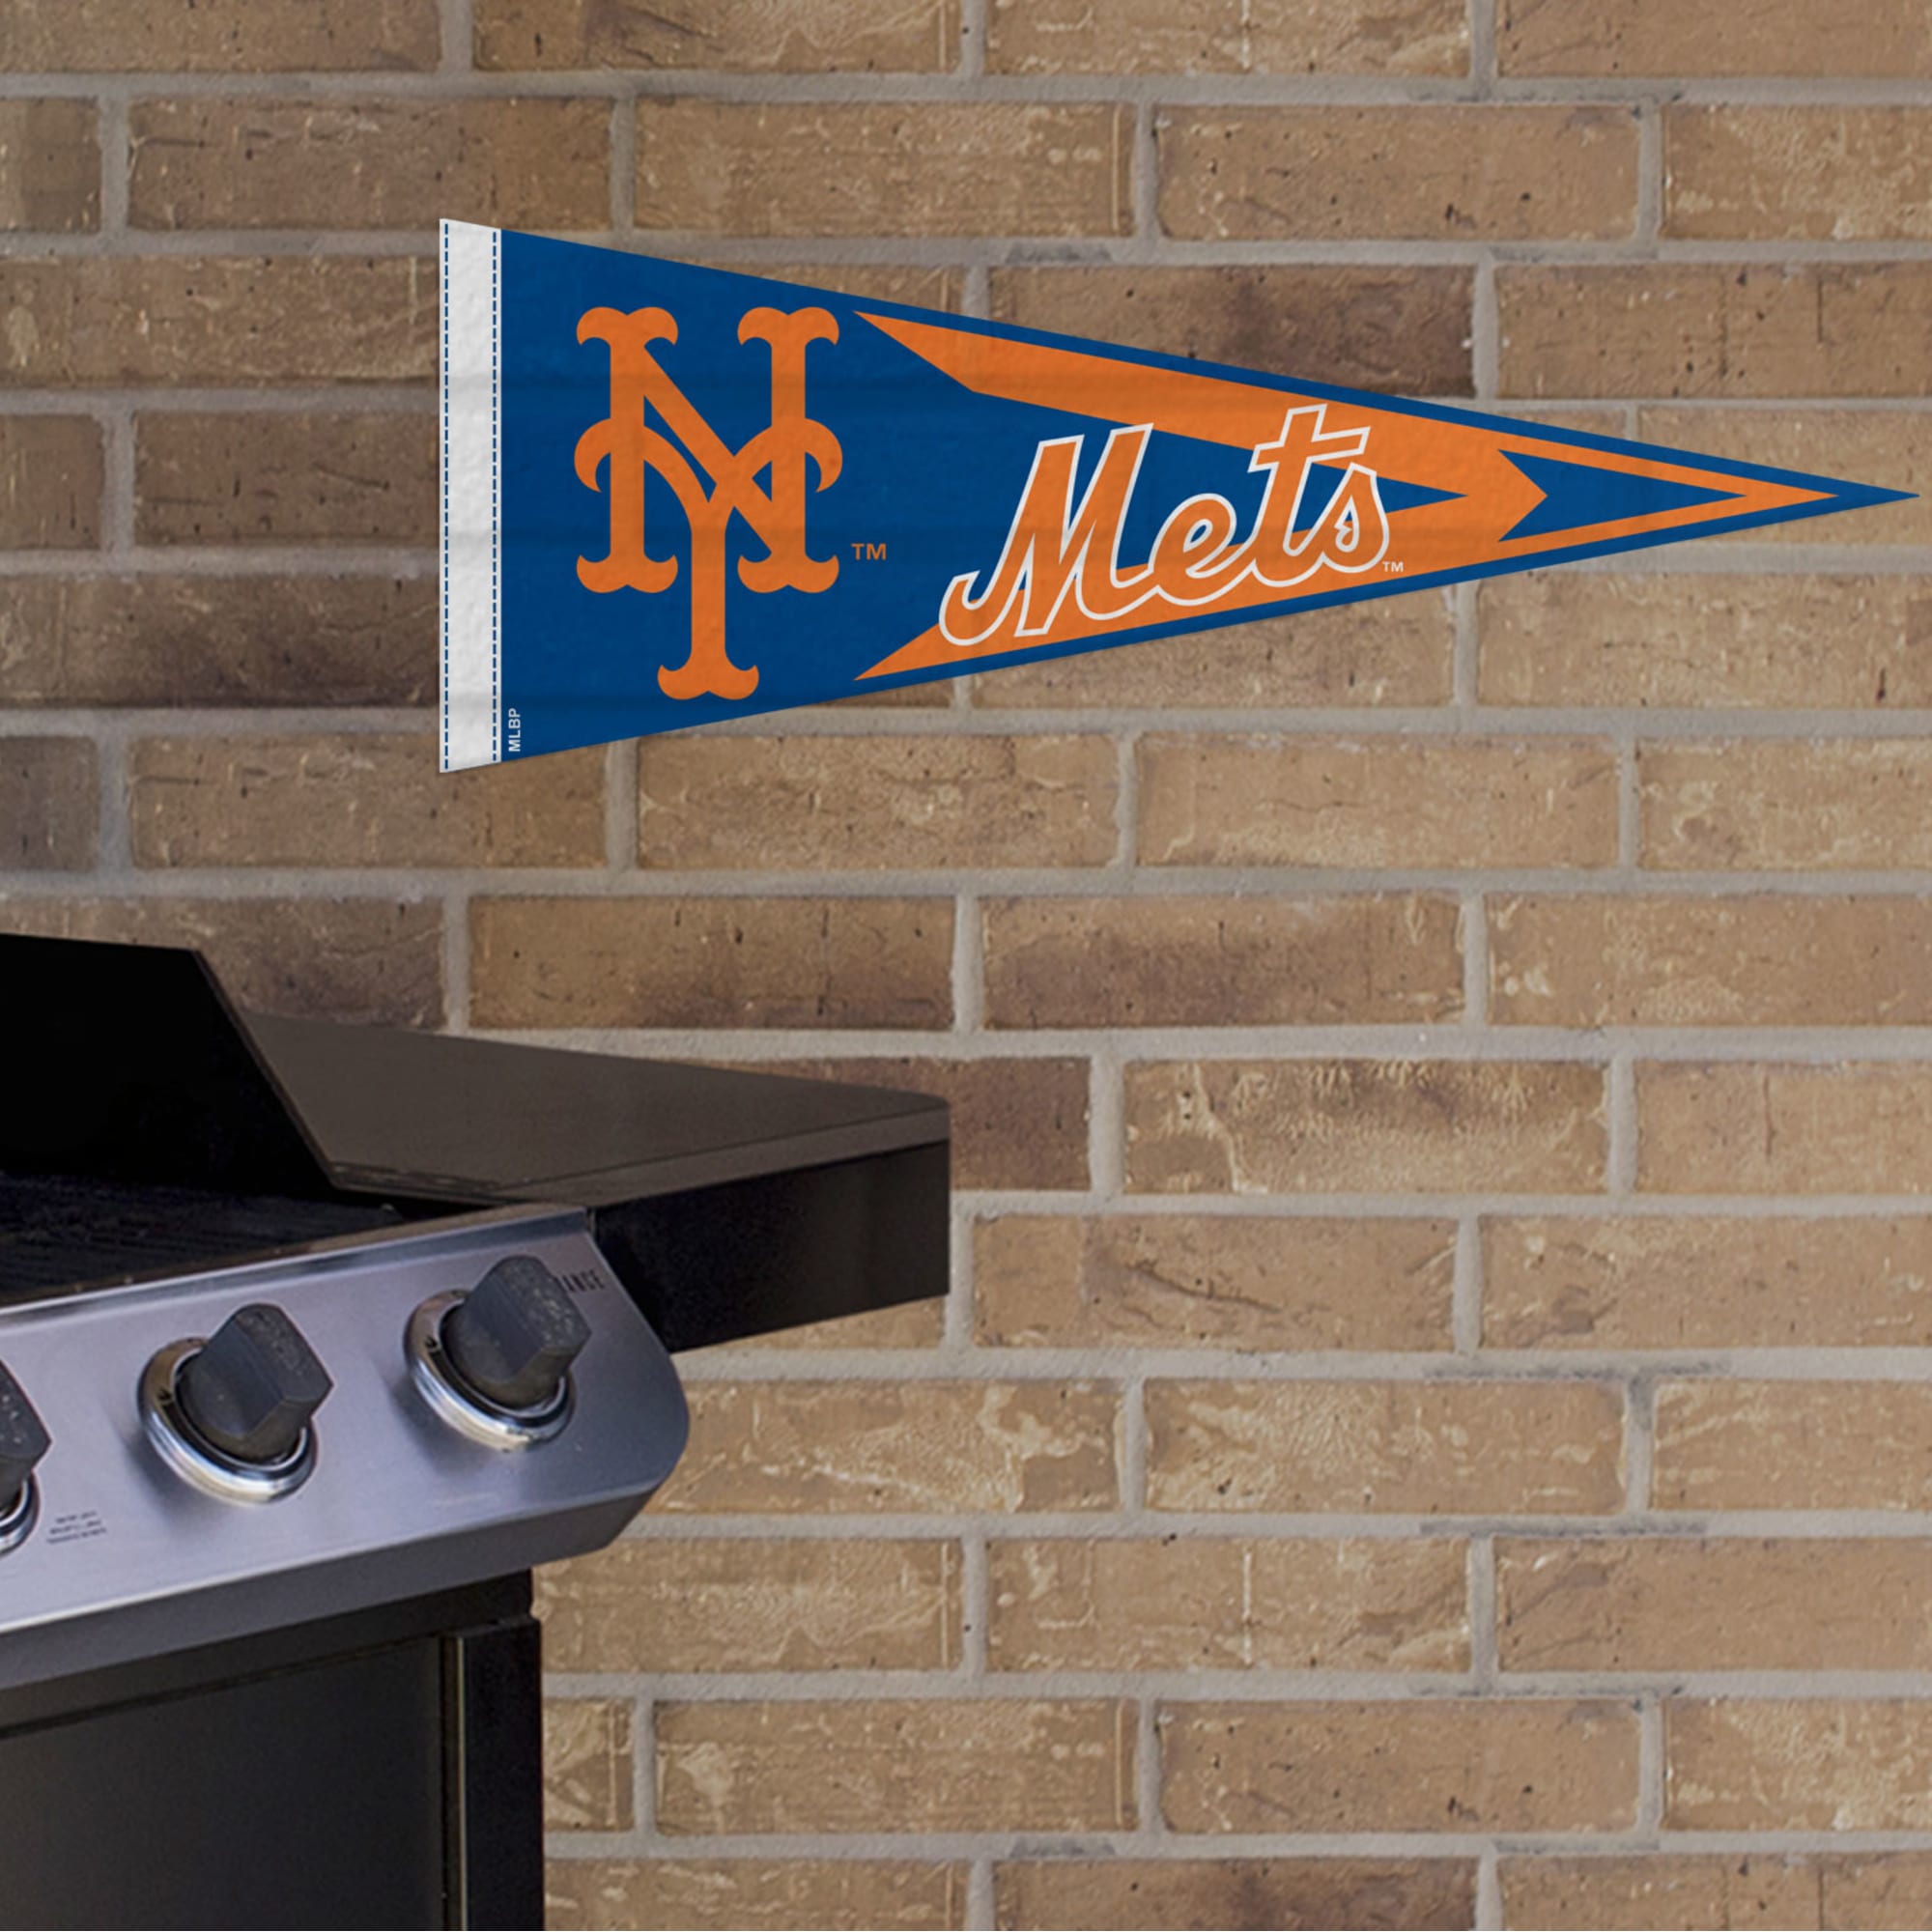 New York Mets: Pennant - Officially Licensed MLB Outdoor Graphic 24.0"W x 9.0"H by Fathead | Wood/Aluminum